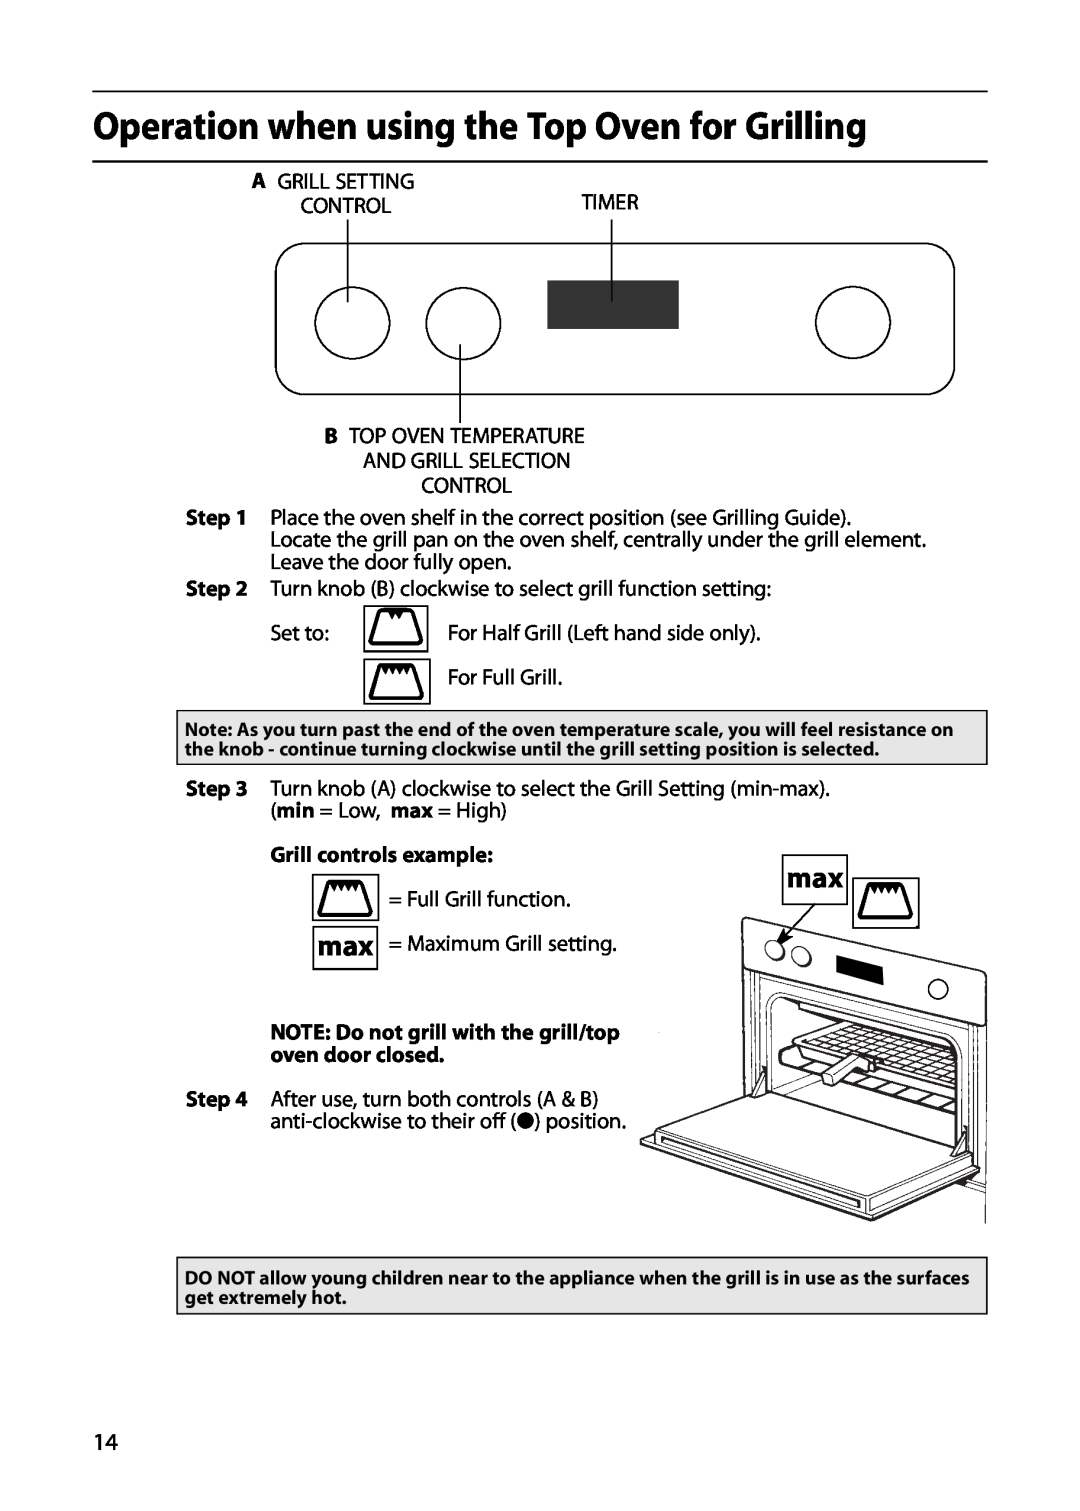 Indesit FIU20 manual Operation when using the Top Oven for Grilling, Grill controls example 